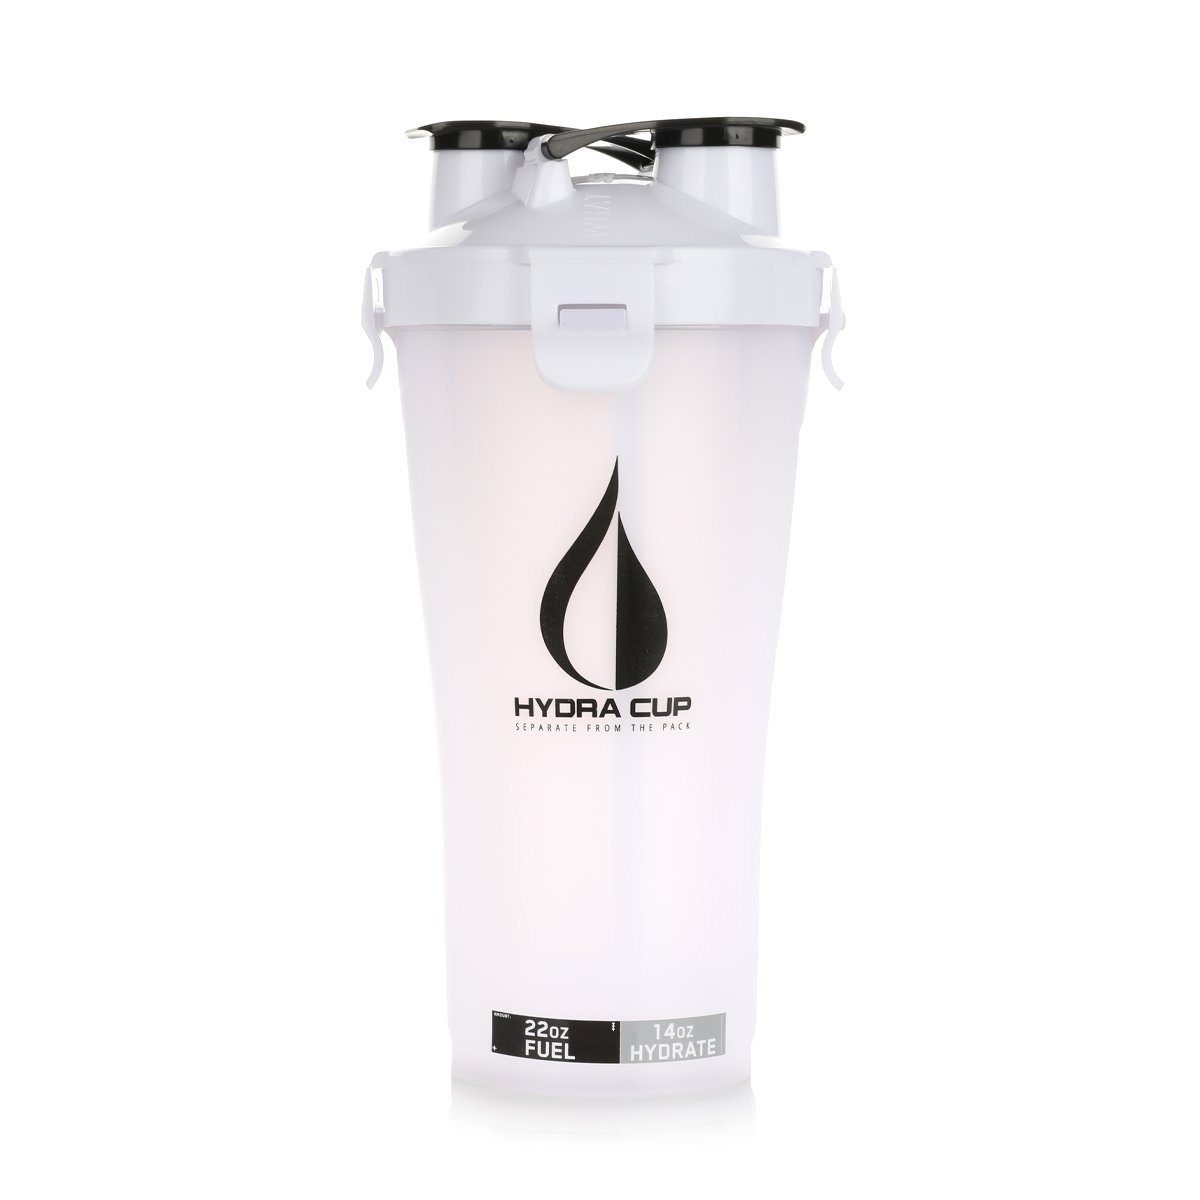 Hydra Cup - Dual Threat Shaker Bottle (30 oz) - White - Store 974 | ستور ٩٧٤